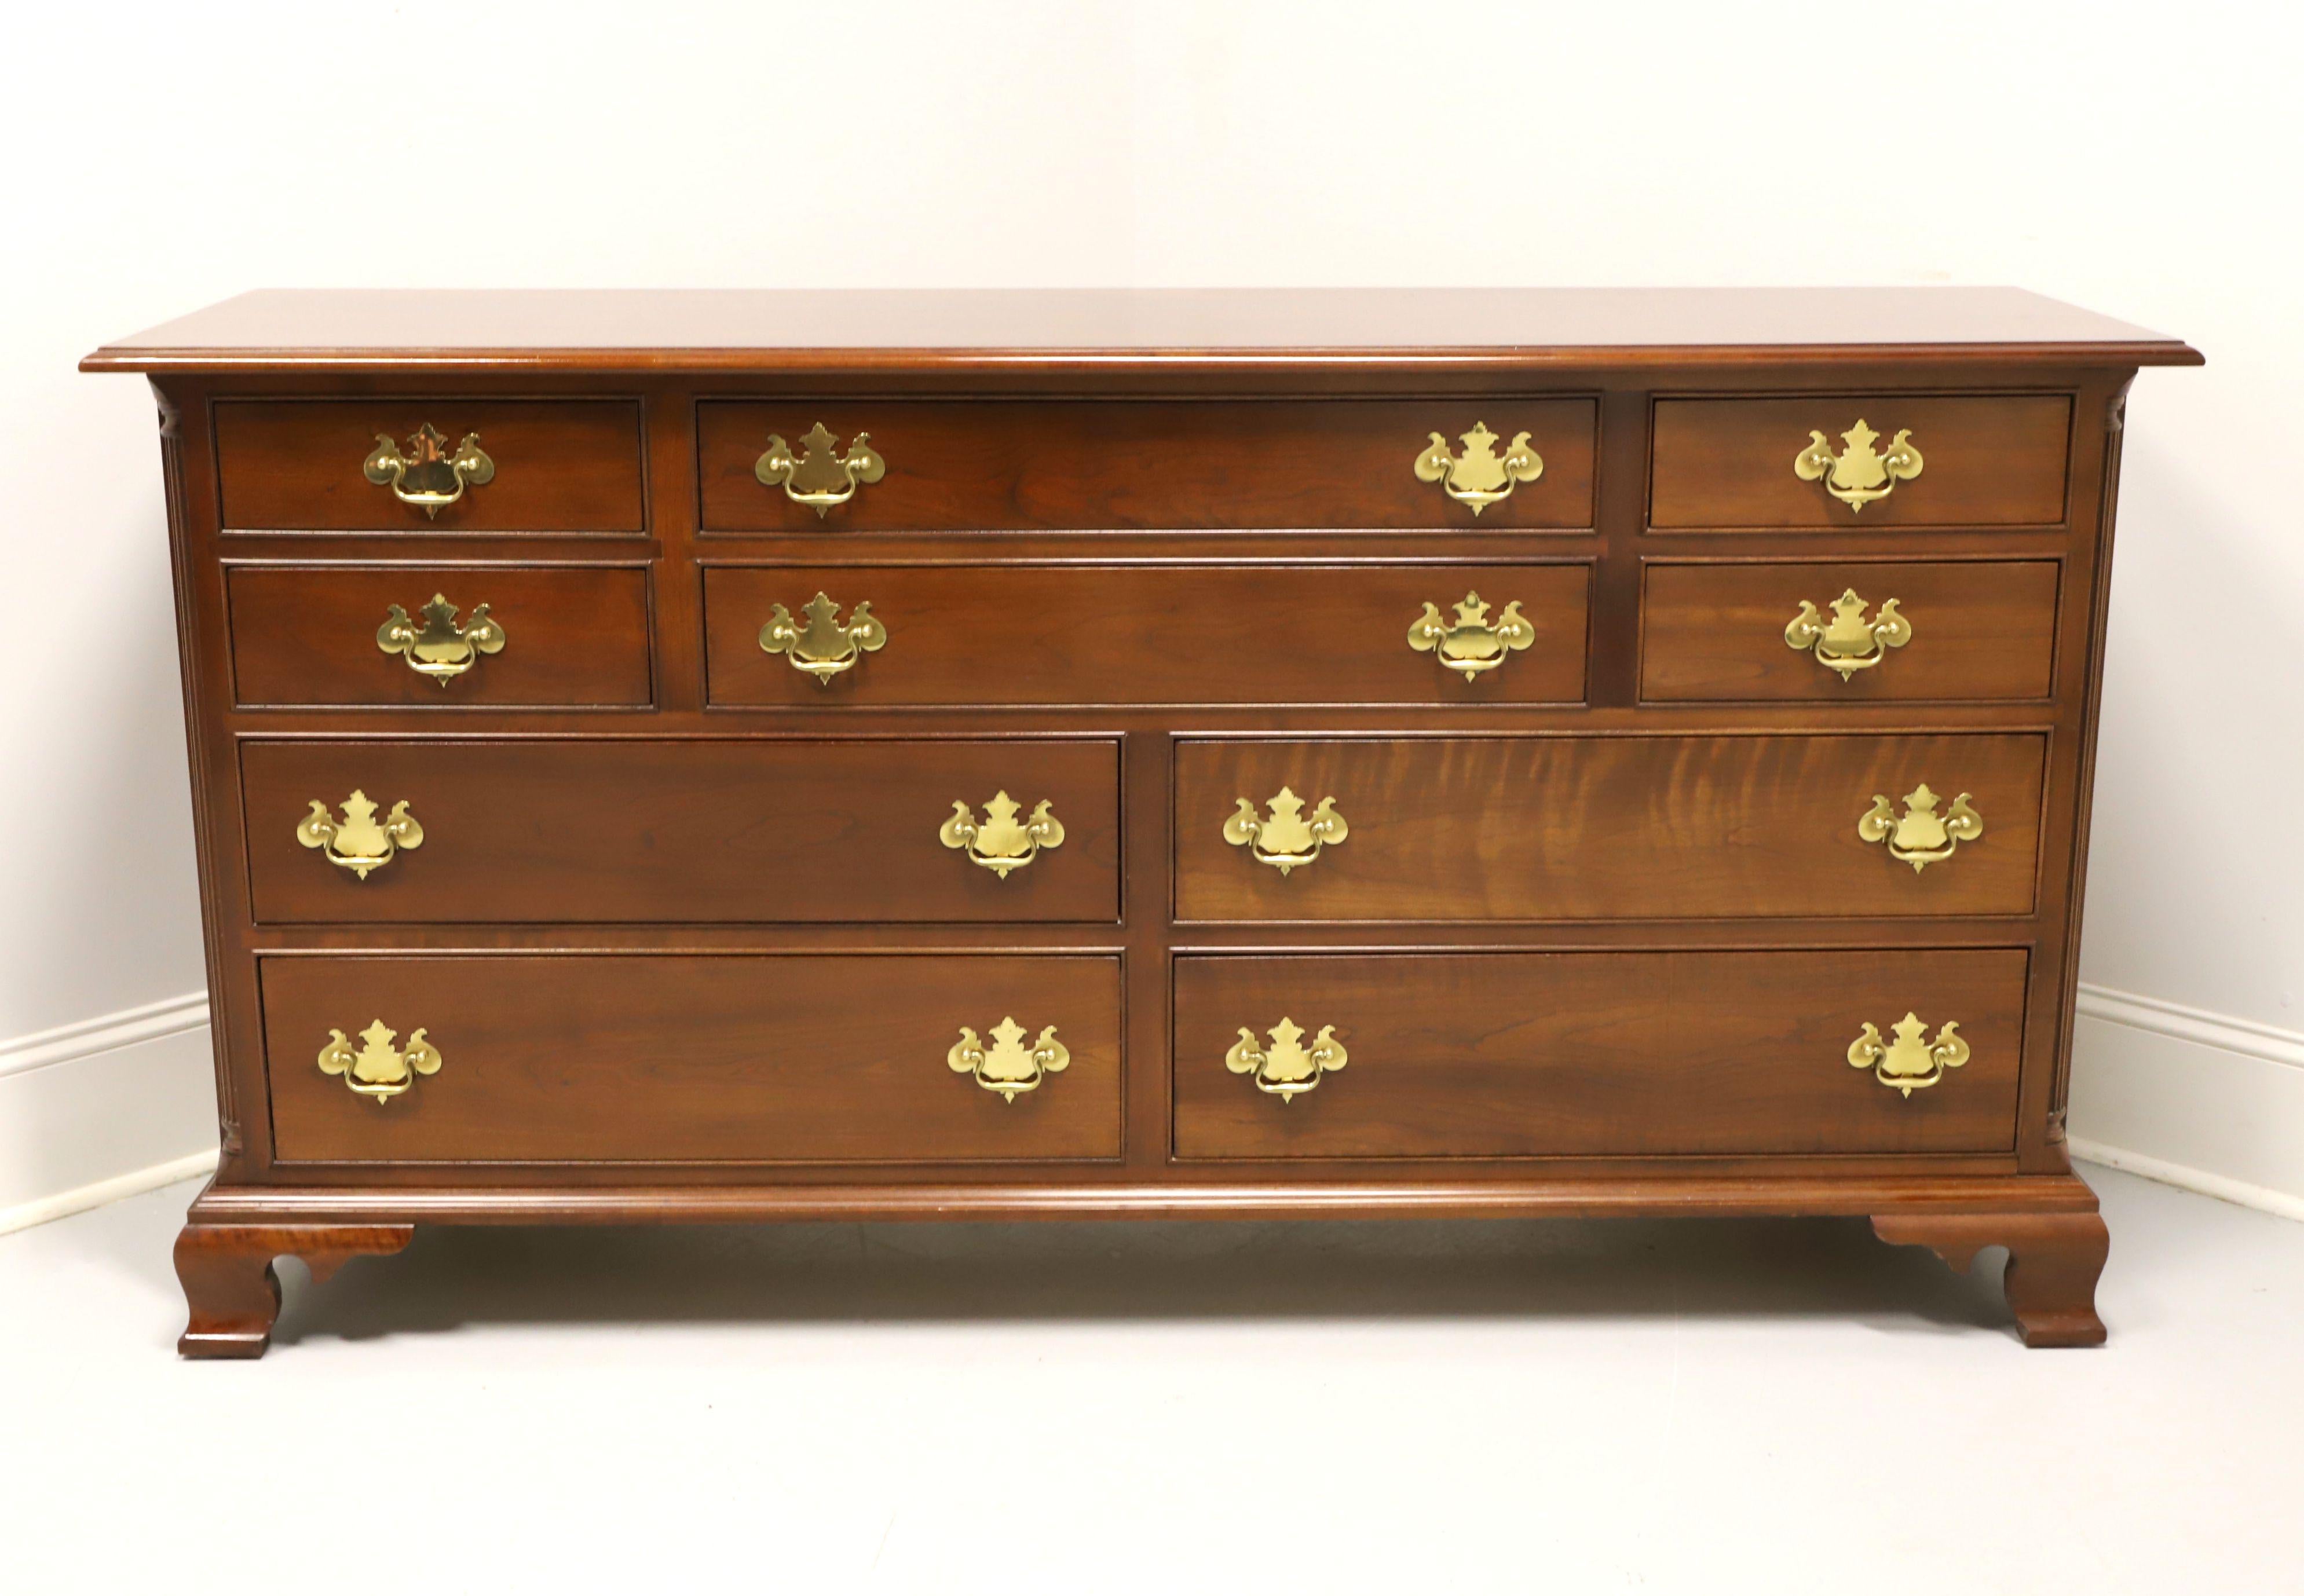 A Chippendale style triple dresser by Stickley Furniture, a Leopold Stickley original. Solid cherry with brass hardware, smooth top with ogee edge, decorative fluted columns at front sides and ogee bracket feet. Features ten various size drawers of